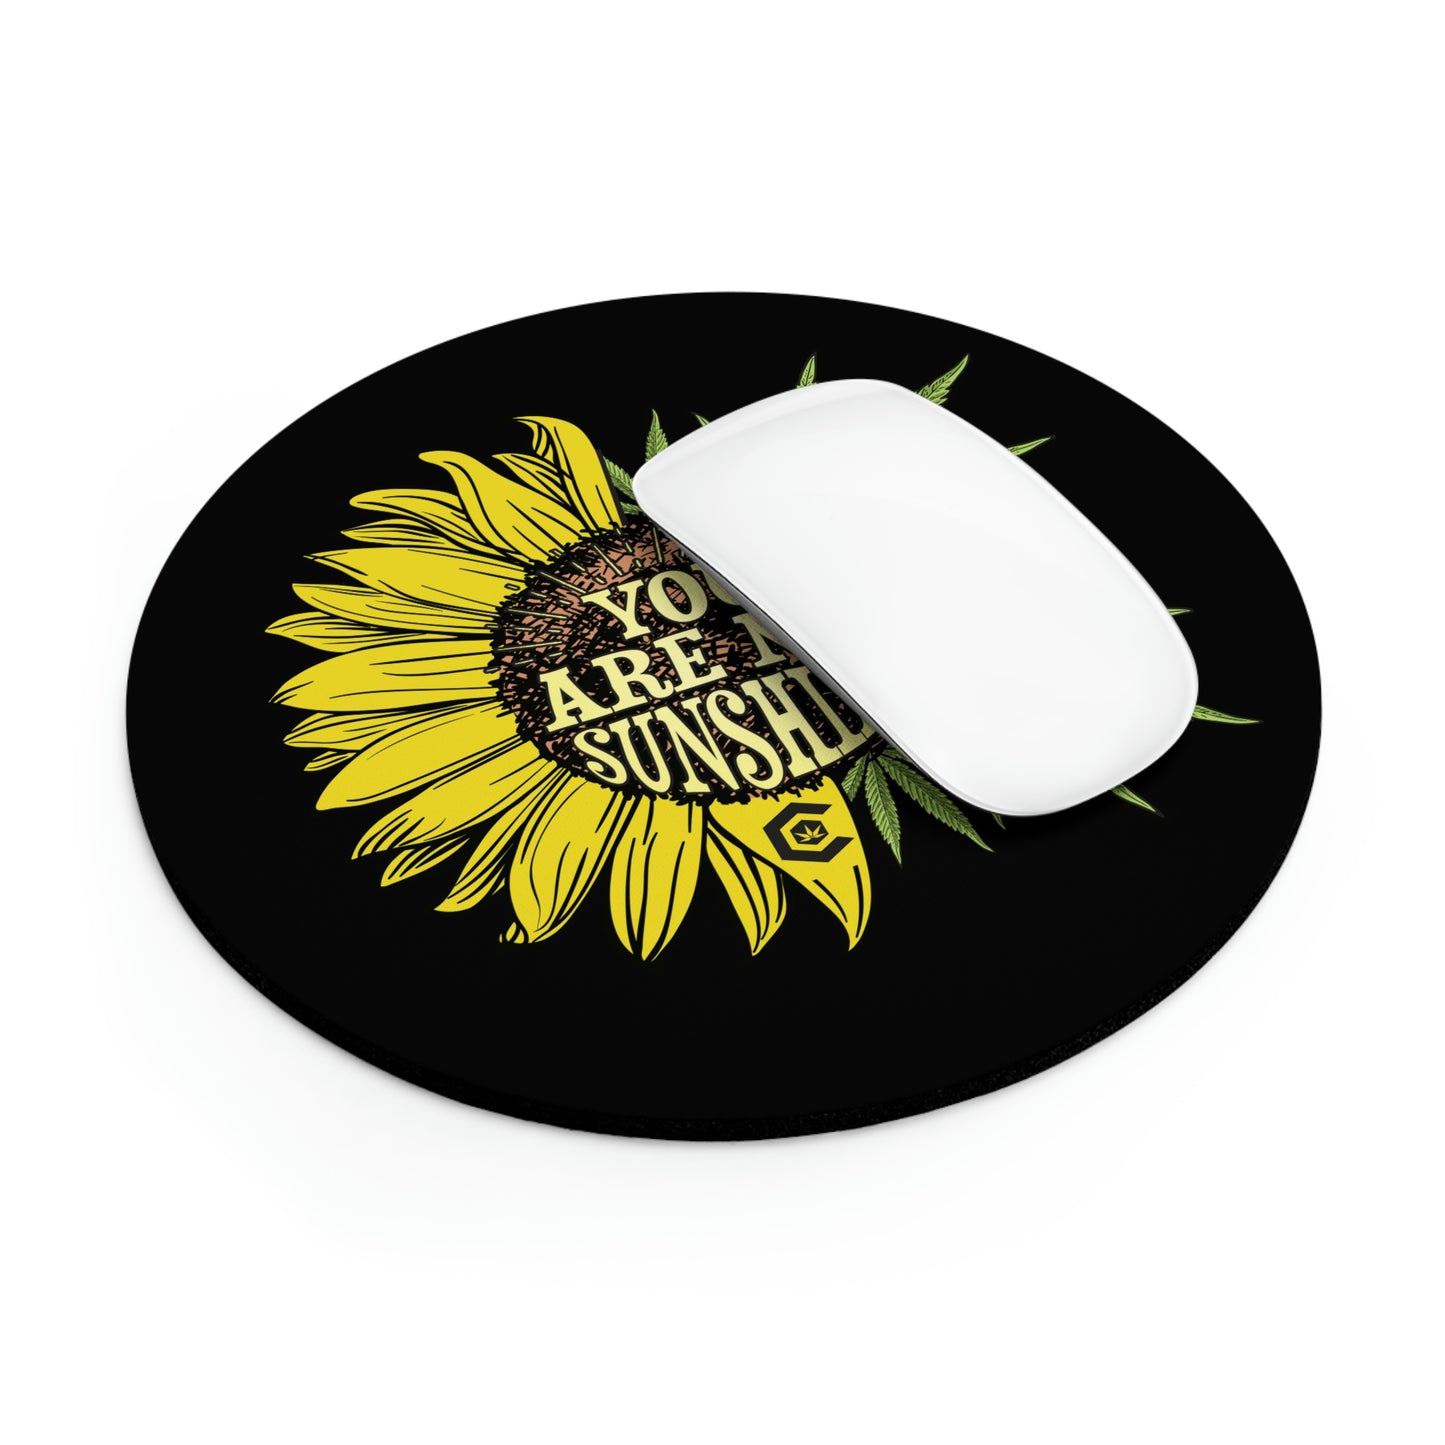 This circle You Are My Sunshine Mouse Pad is being used in junction with a white wireless mouse to show an ultimate angle of the pad in use.